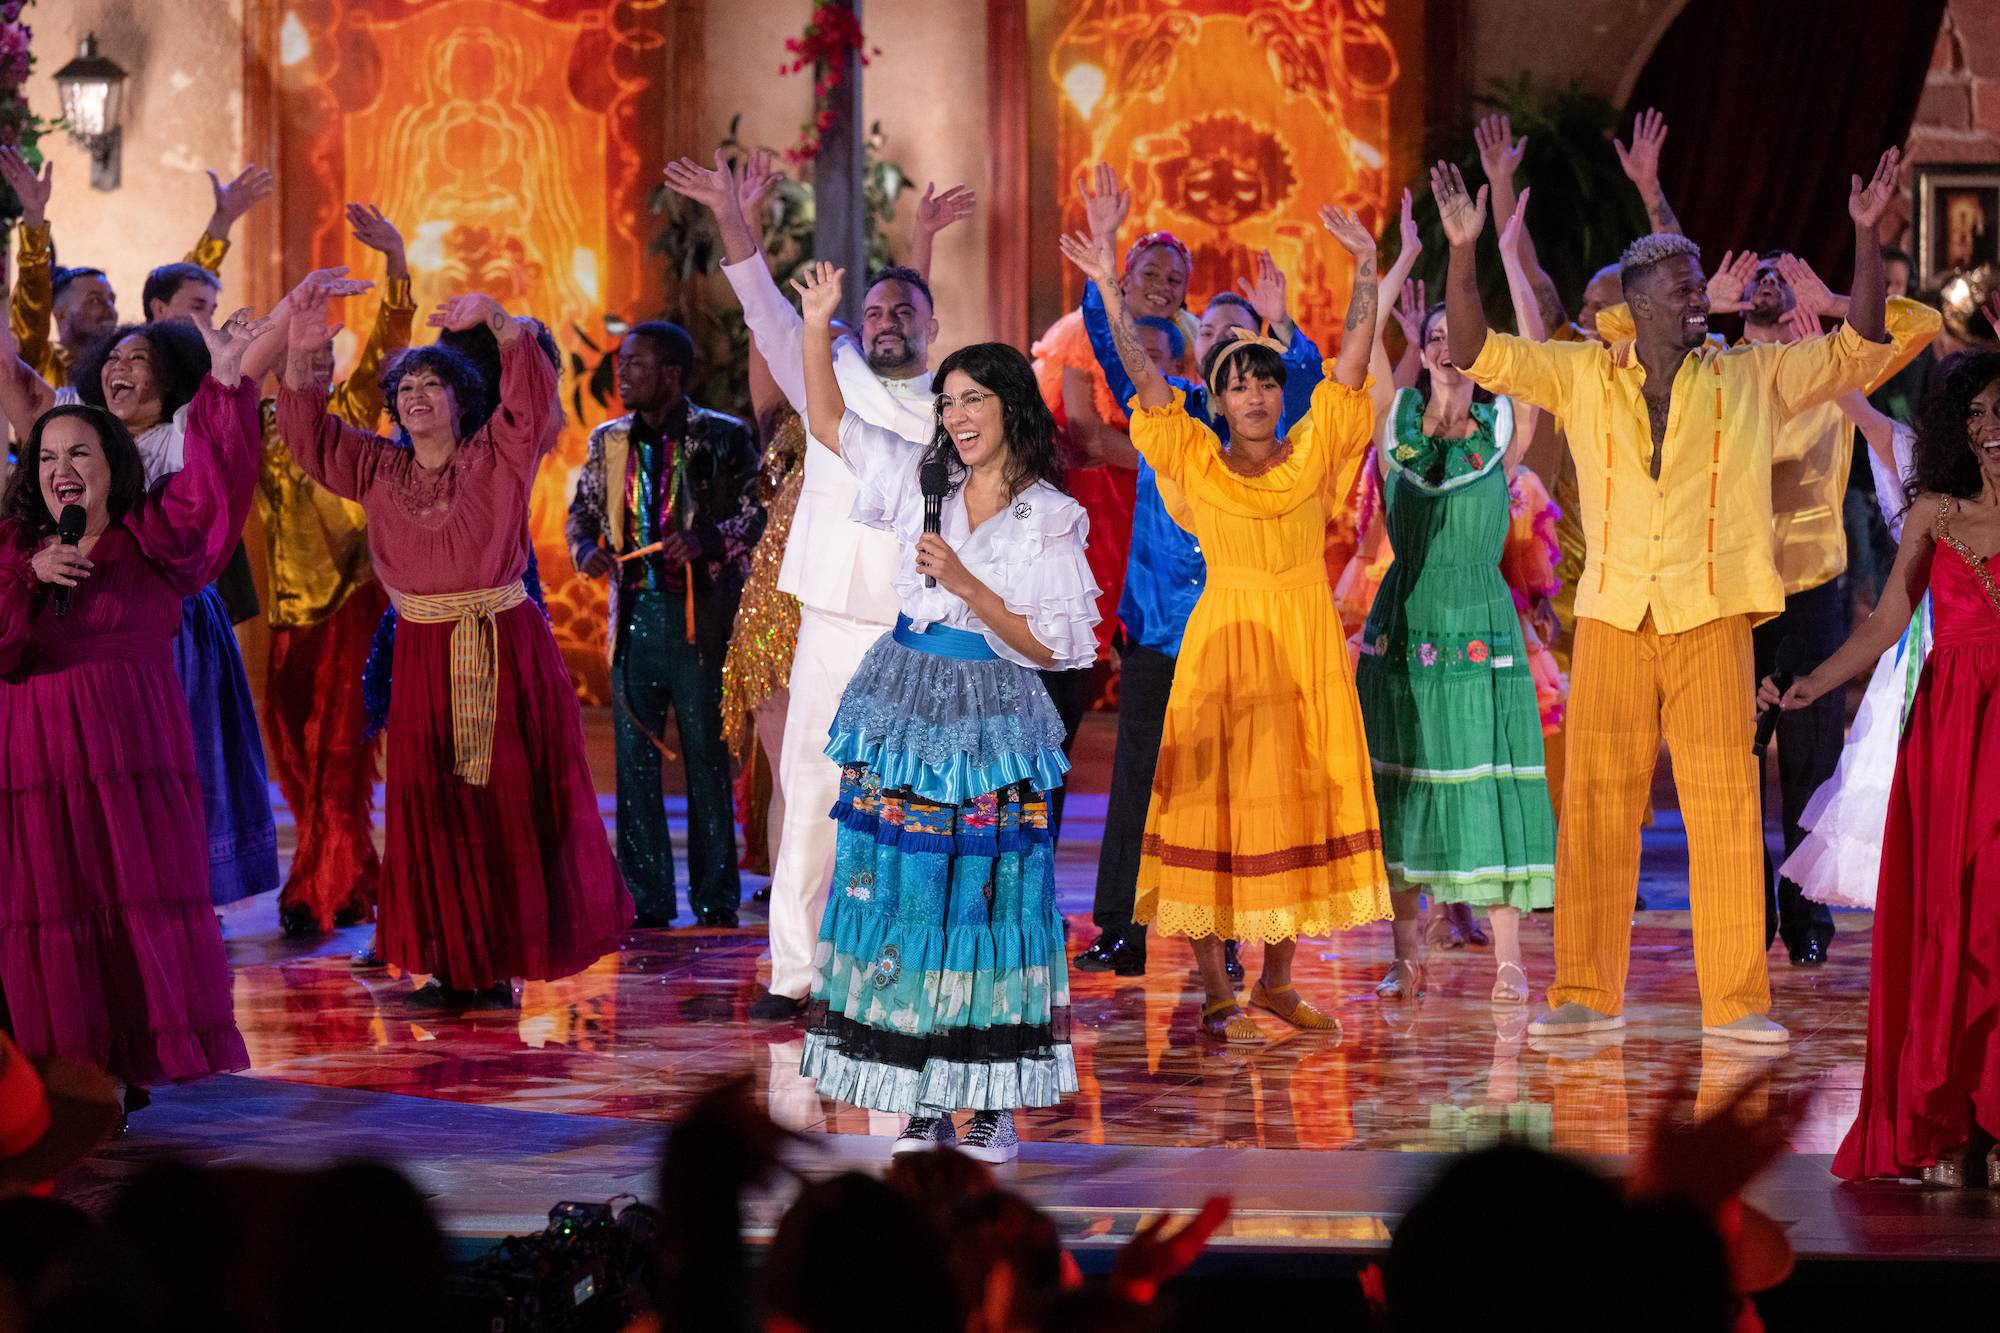 The cast of Encanto perform during the live-to-film concert experience Encanto at the Hollywood Bowl. Encanto at the Hollywood Bowl, from Disney Branded Television, will premiere on Dec. 28 only on Disney+.. (Photo credit: Disney/Temma Hankin)